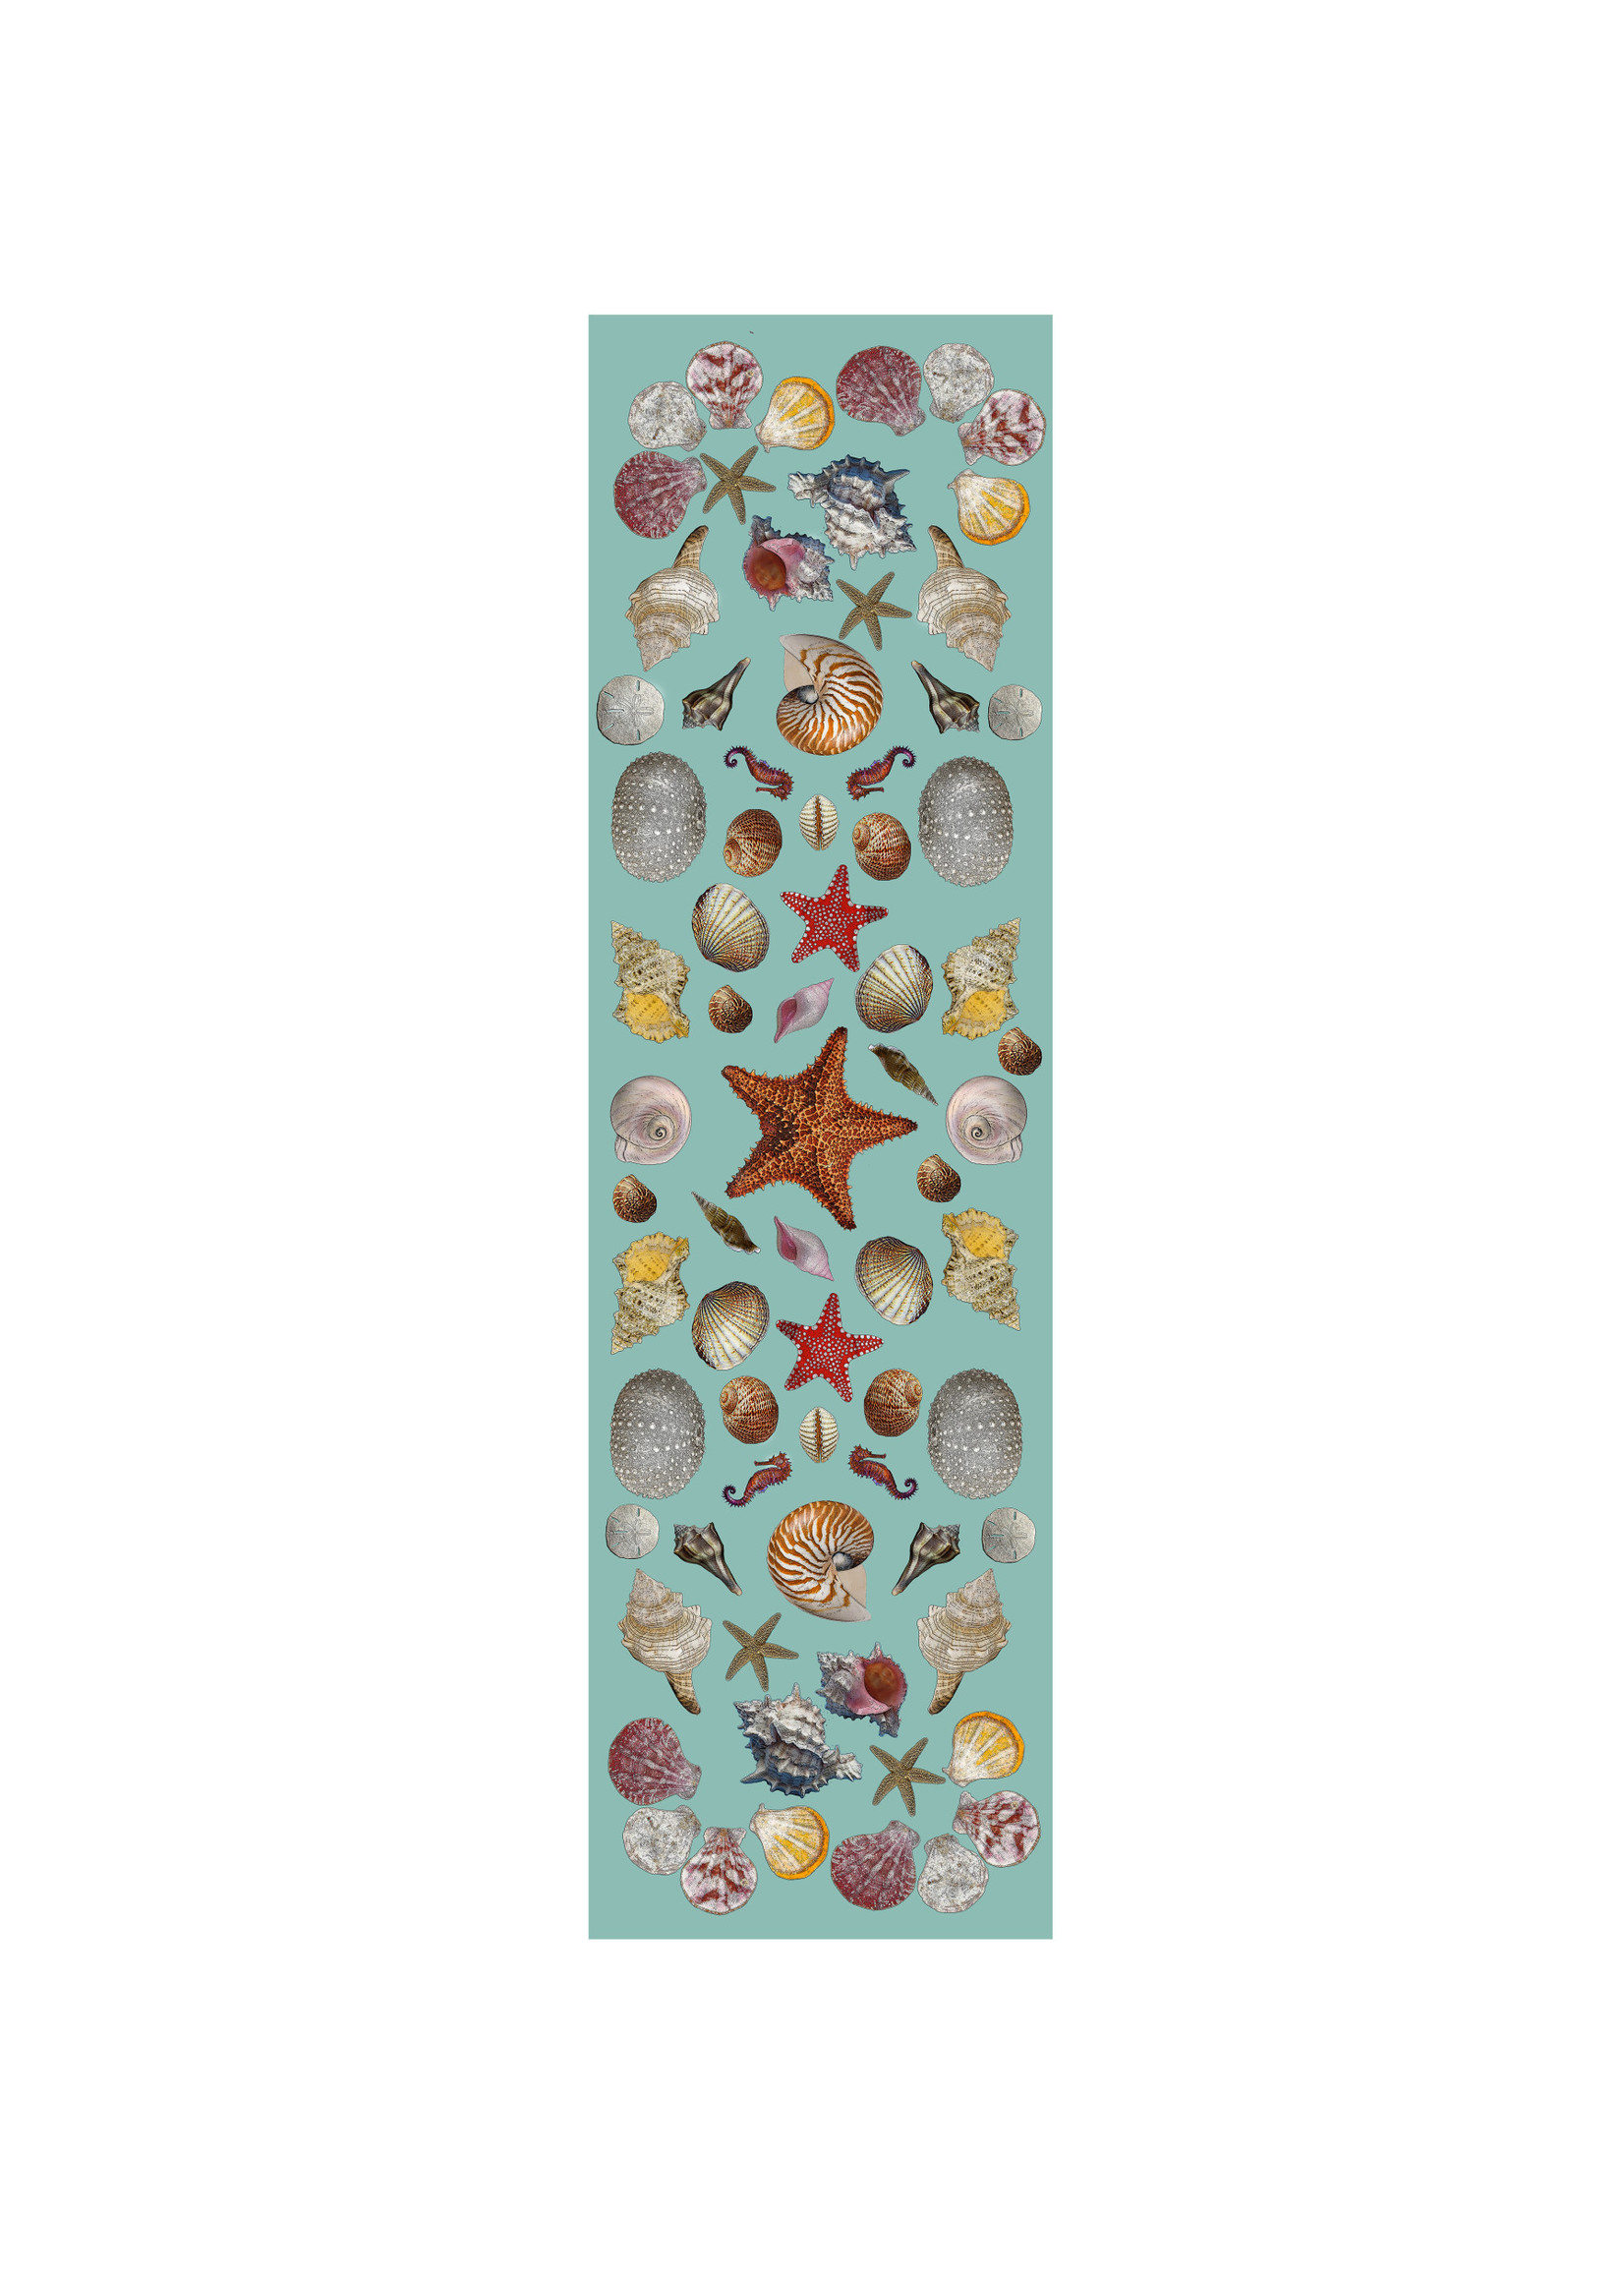 Alphie and Ollie sea shells table runner 20 x 70 inches